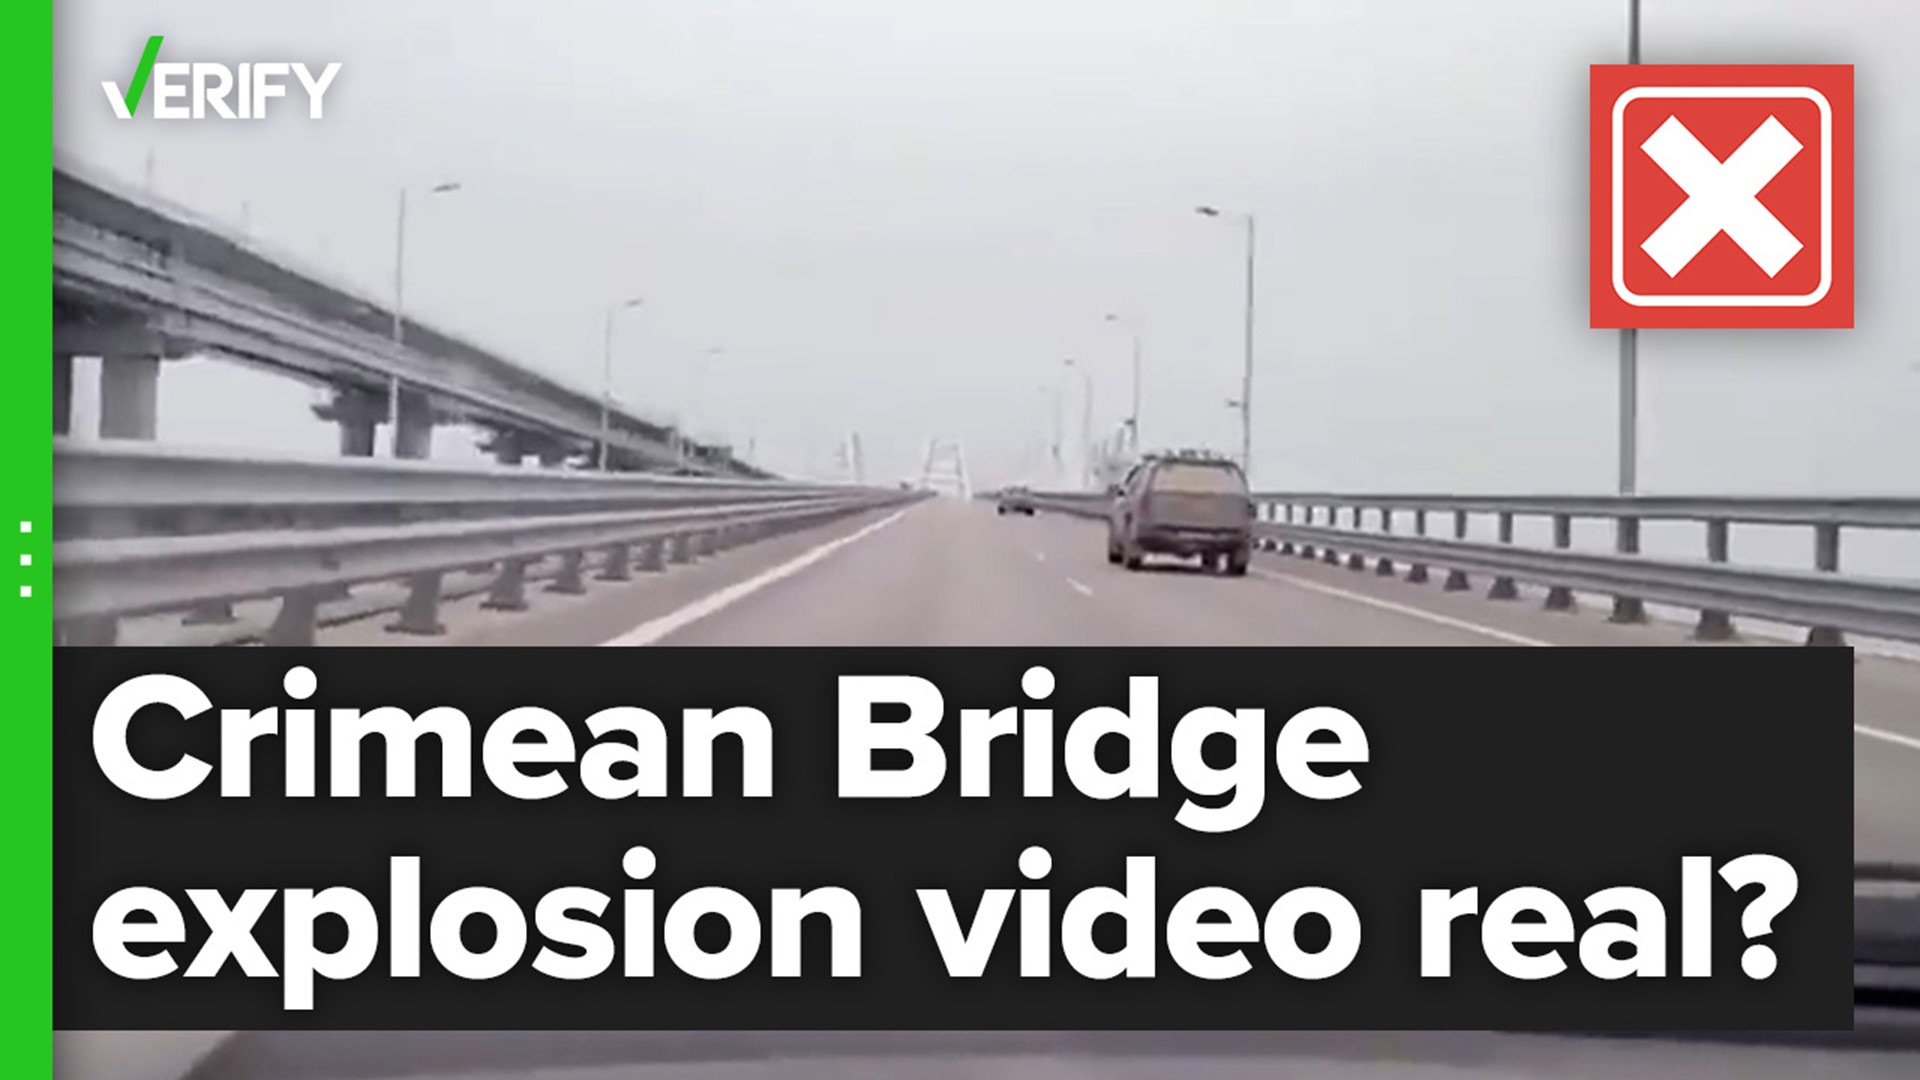 The video was made using video from the Crimean Bridge and a clip from a strike in Kharkiv, neither from the October explosion.